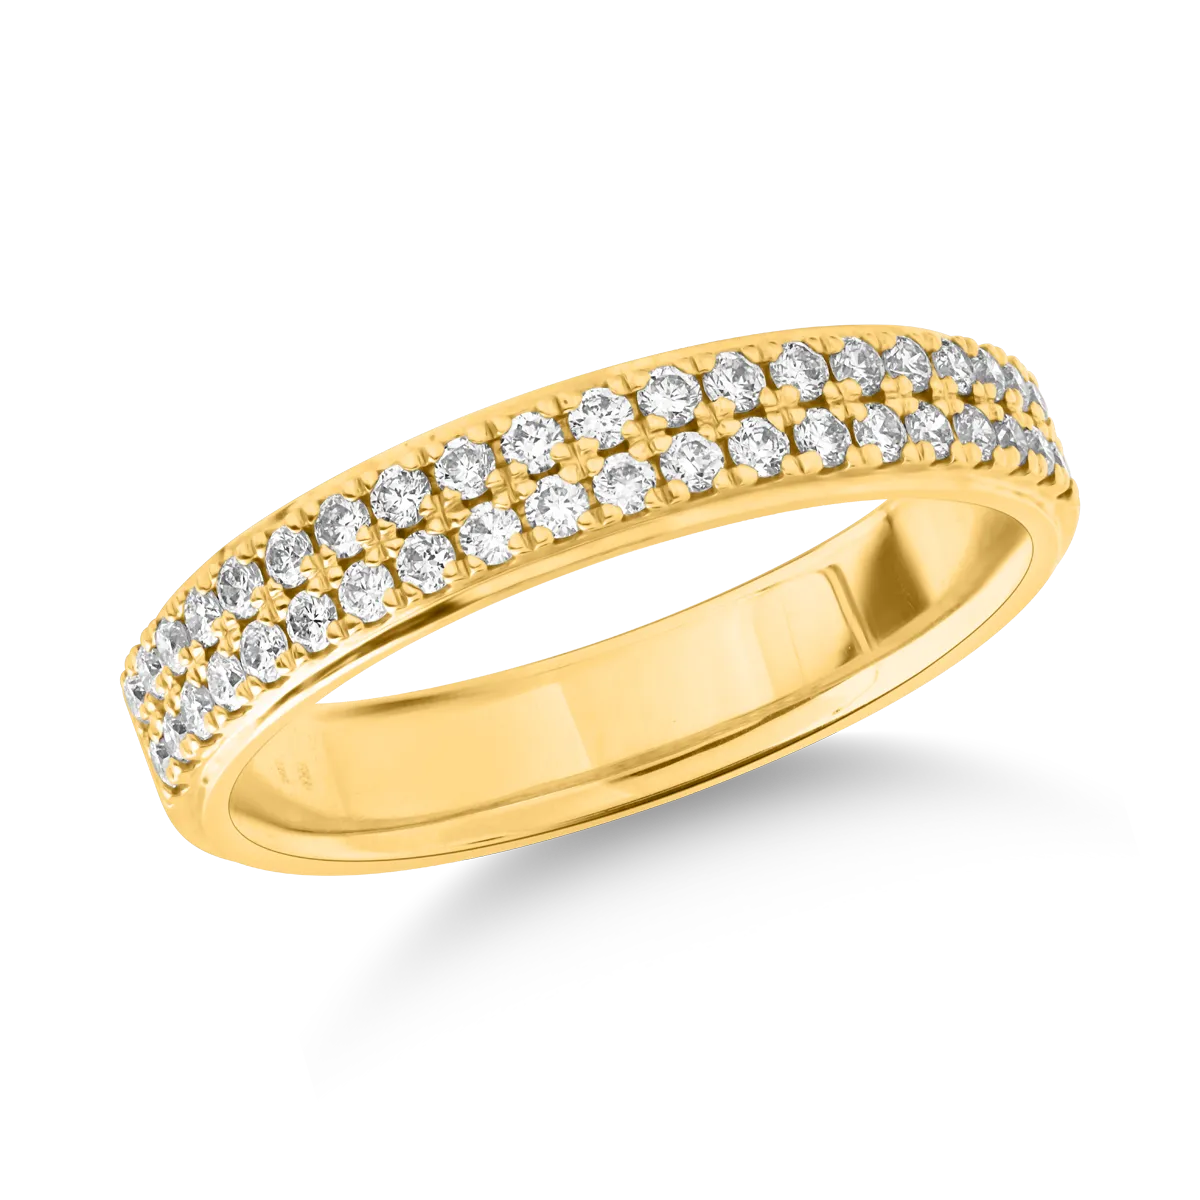 18K yellow gold ring with 0.35ct diamonds